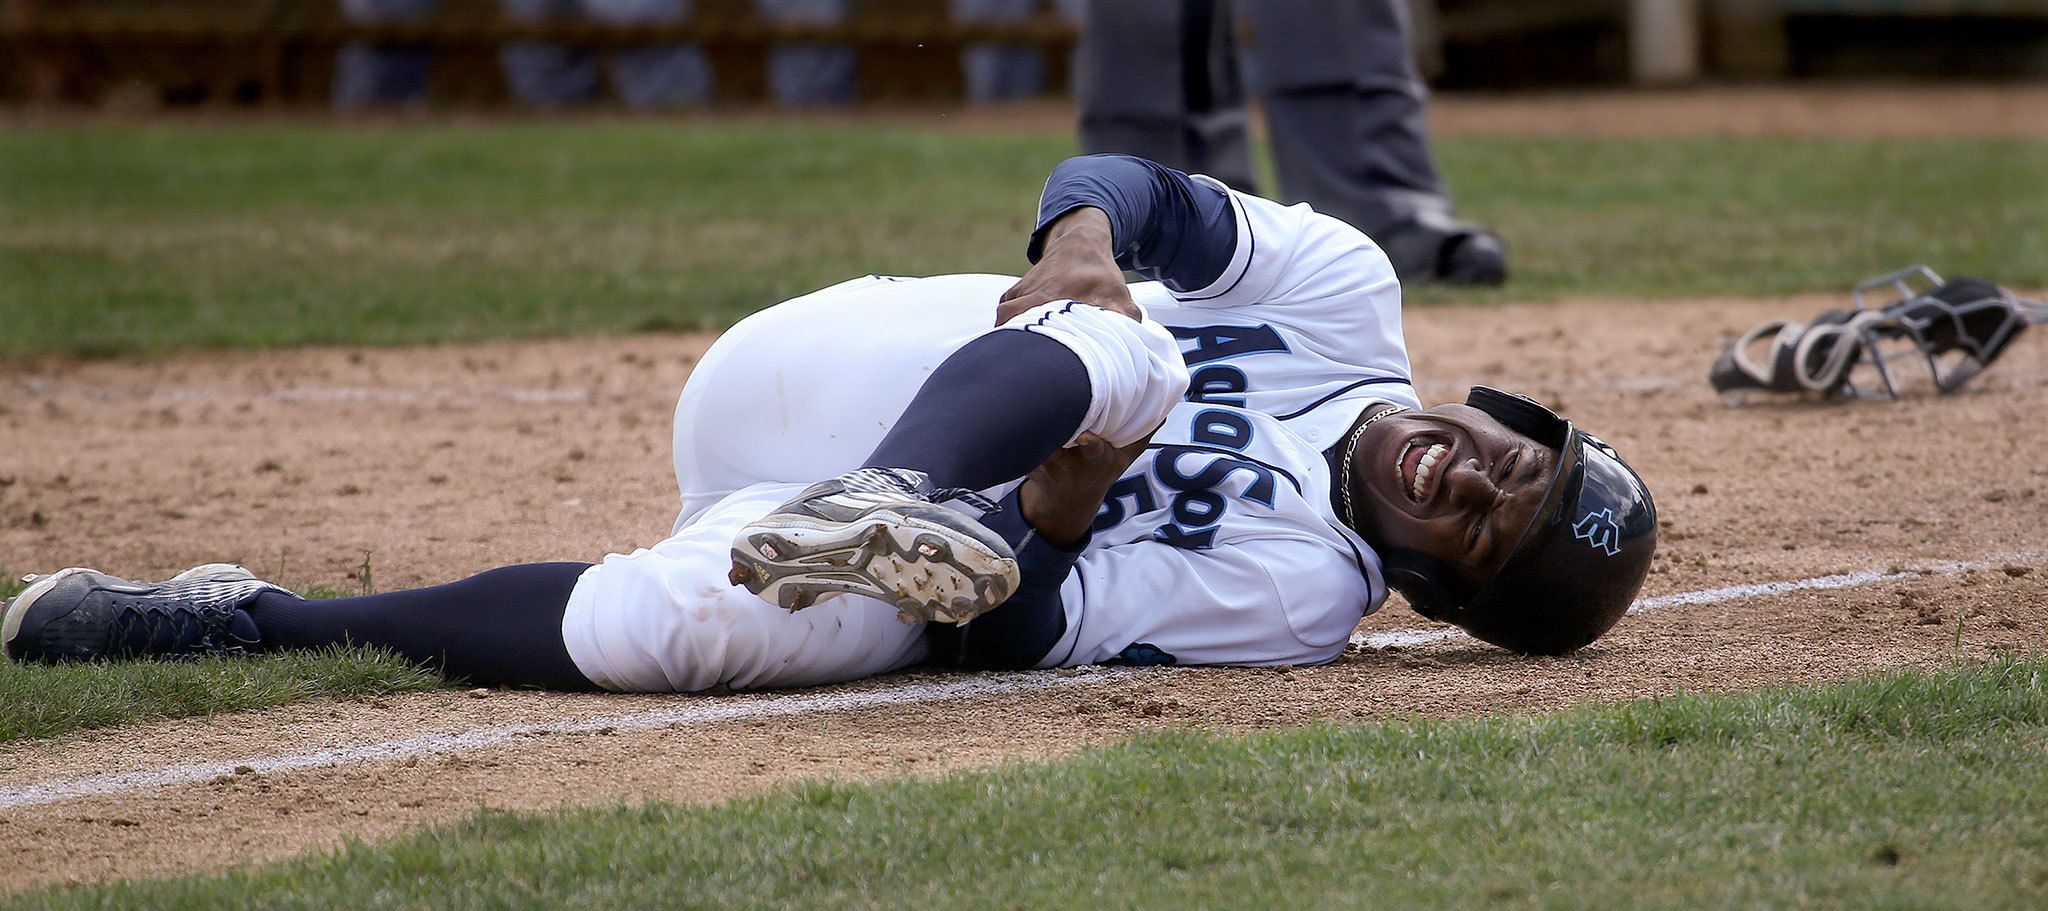 The AquaSox’s Kyle Lewis grabs his right knee after colliding with Dust Devils catcher Chris Mattison in Everett’s 8-6 loss to Tri-City on Tuesday at Everett Memorial Stadium. Lewis, the Mariner’s No. 1 draft pick, did not return to the game. (Andy Bronson / The Herald )